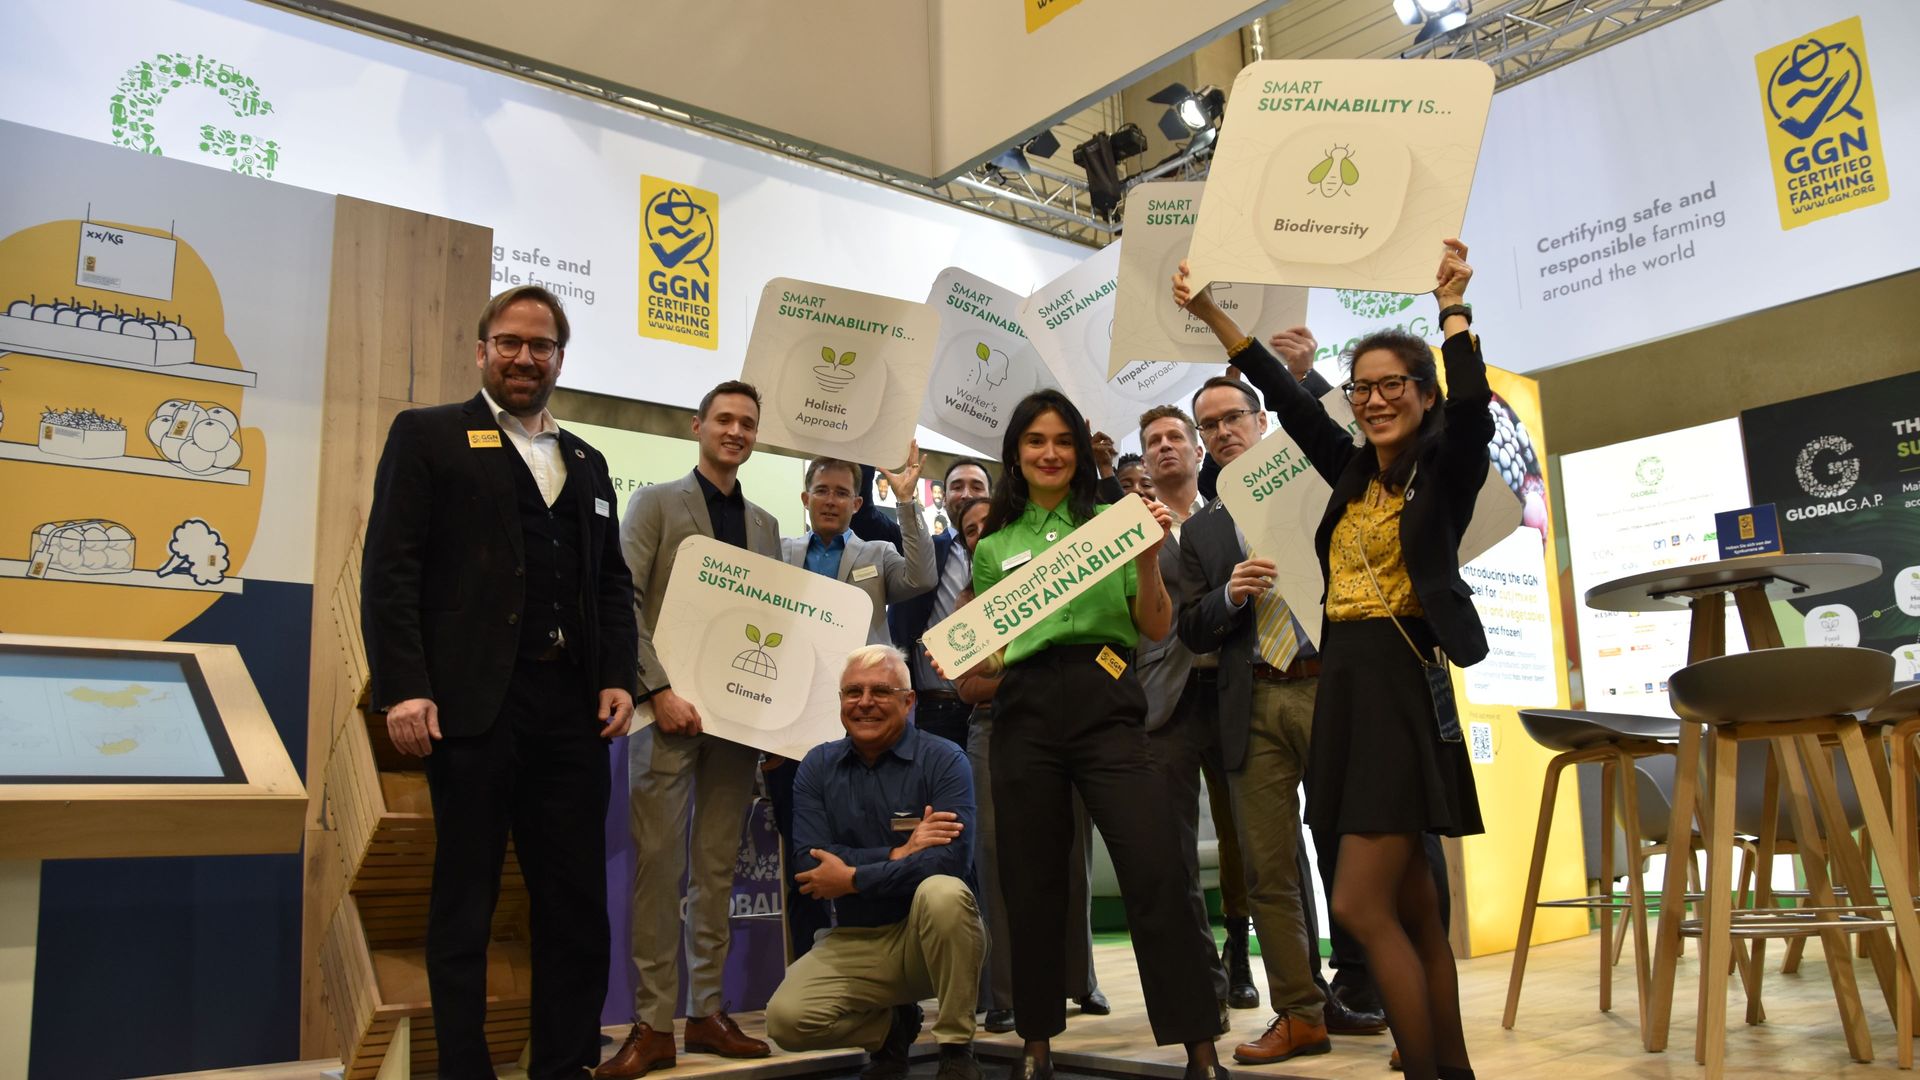 The entire GLOBALG.A.P. team holding up signs for the smart path to sustainability at the booth at Fruit Attraction trade fair 2023.